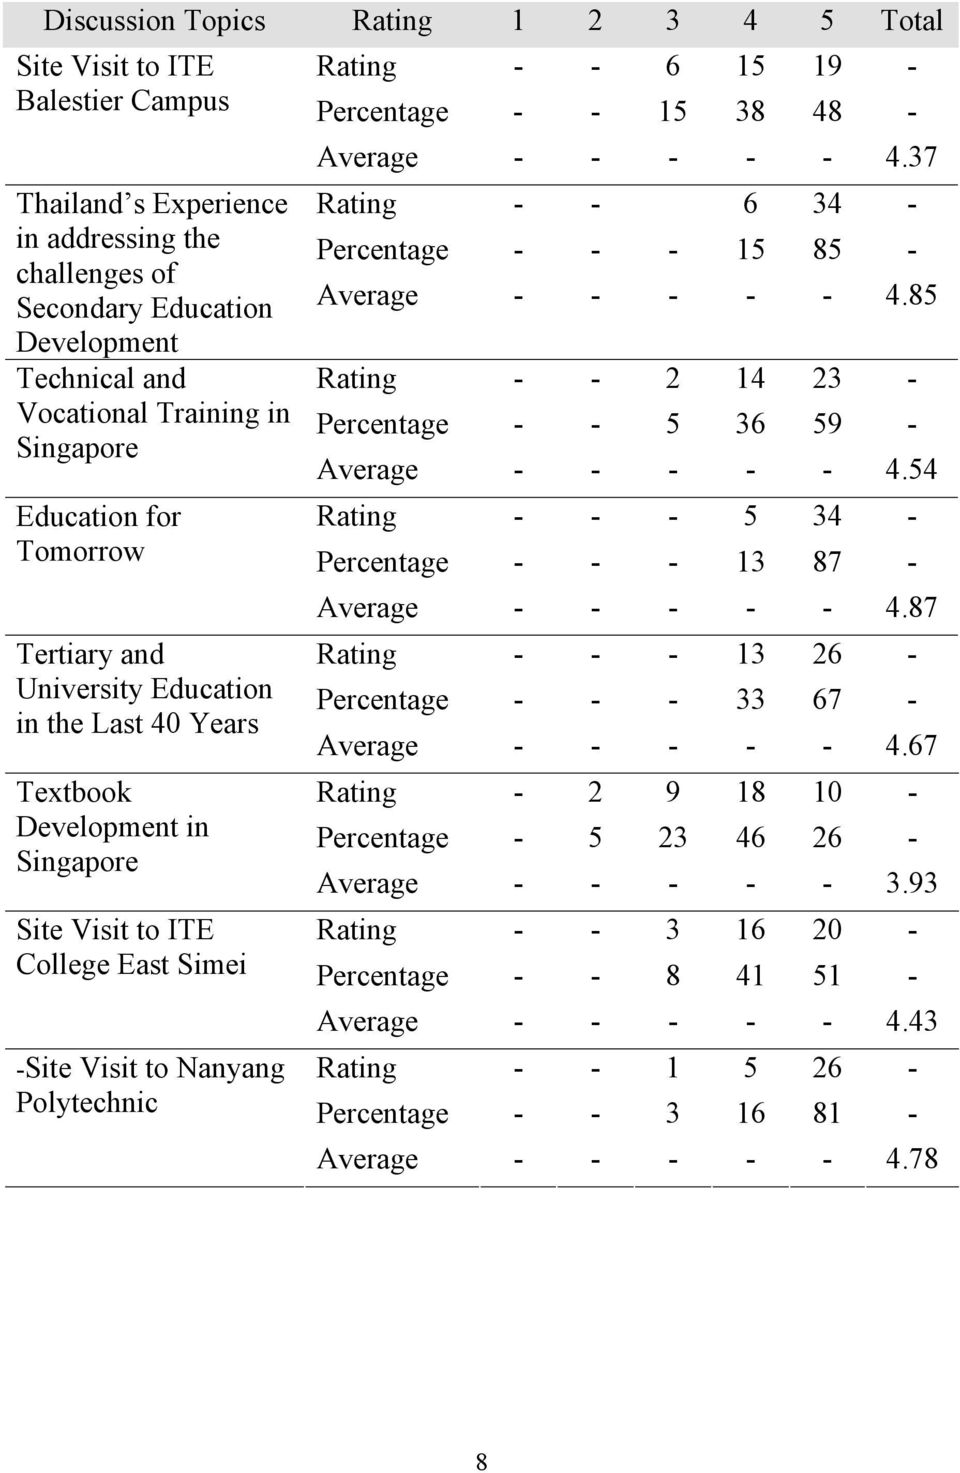 85 Development Technical and - - 2 14 23 - Vocational Training in Percentage - - 5 36 59 - Singapore Average - - - - - 4.